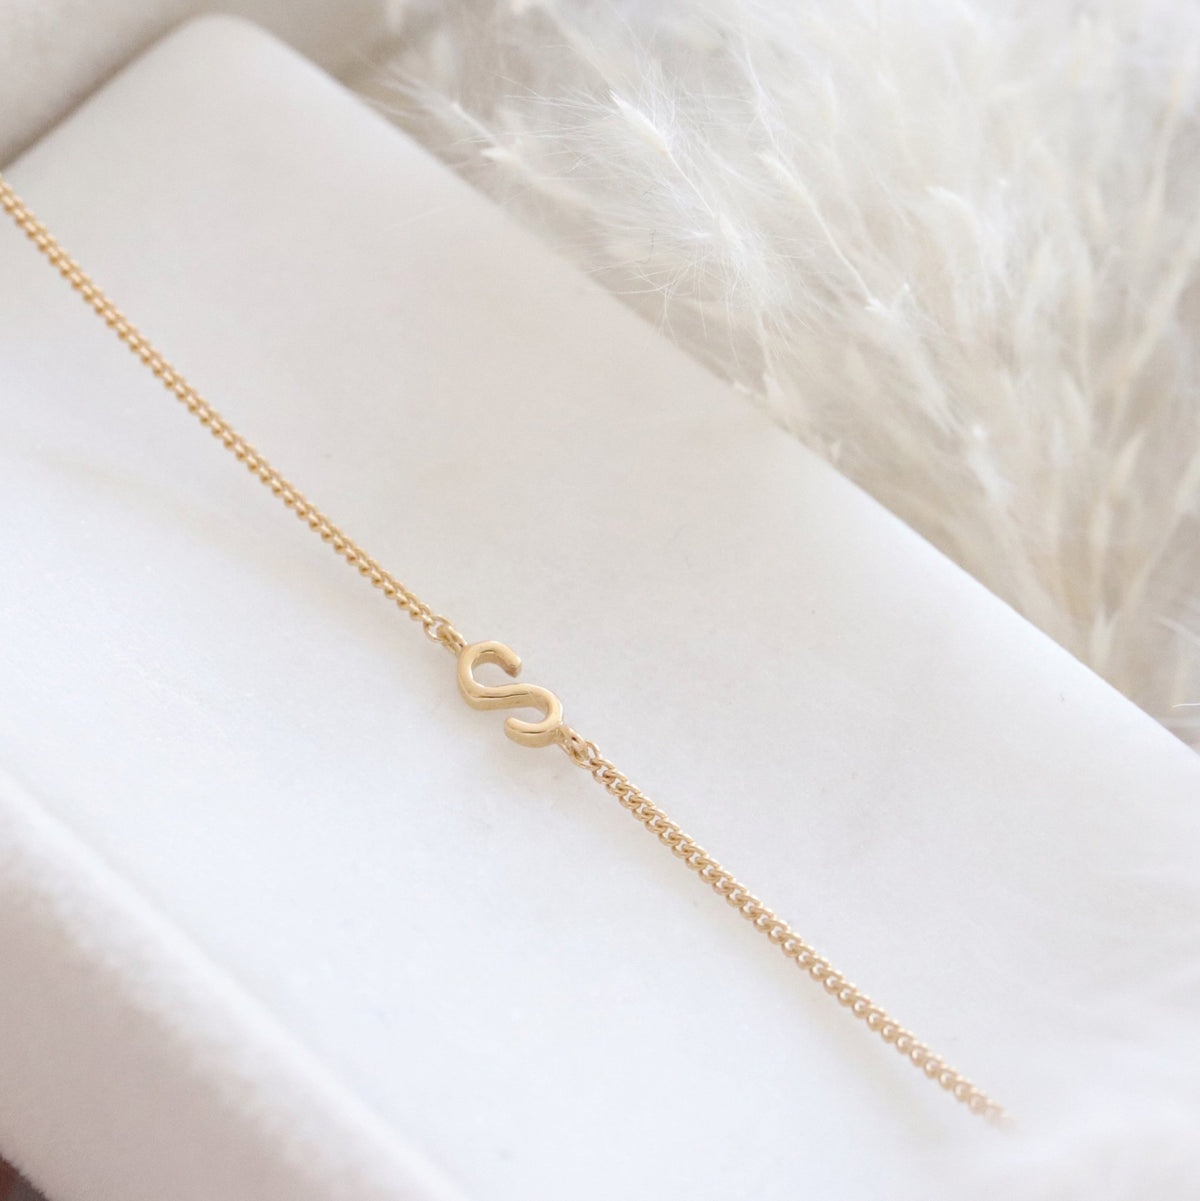 NOTABLE OFFSET INITIAL NECKLACE - S - GOLD - SO PRETTY CARA COTTER